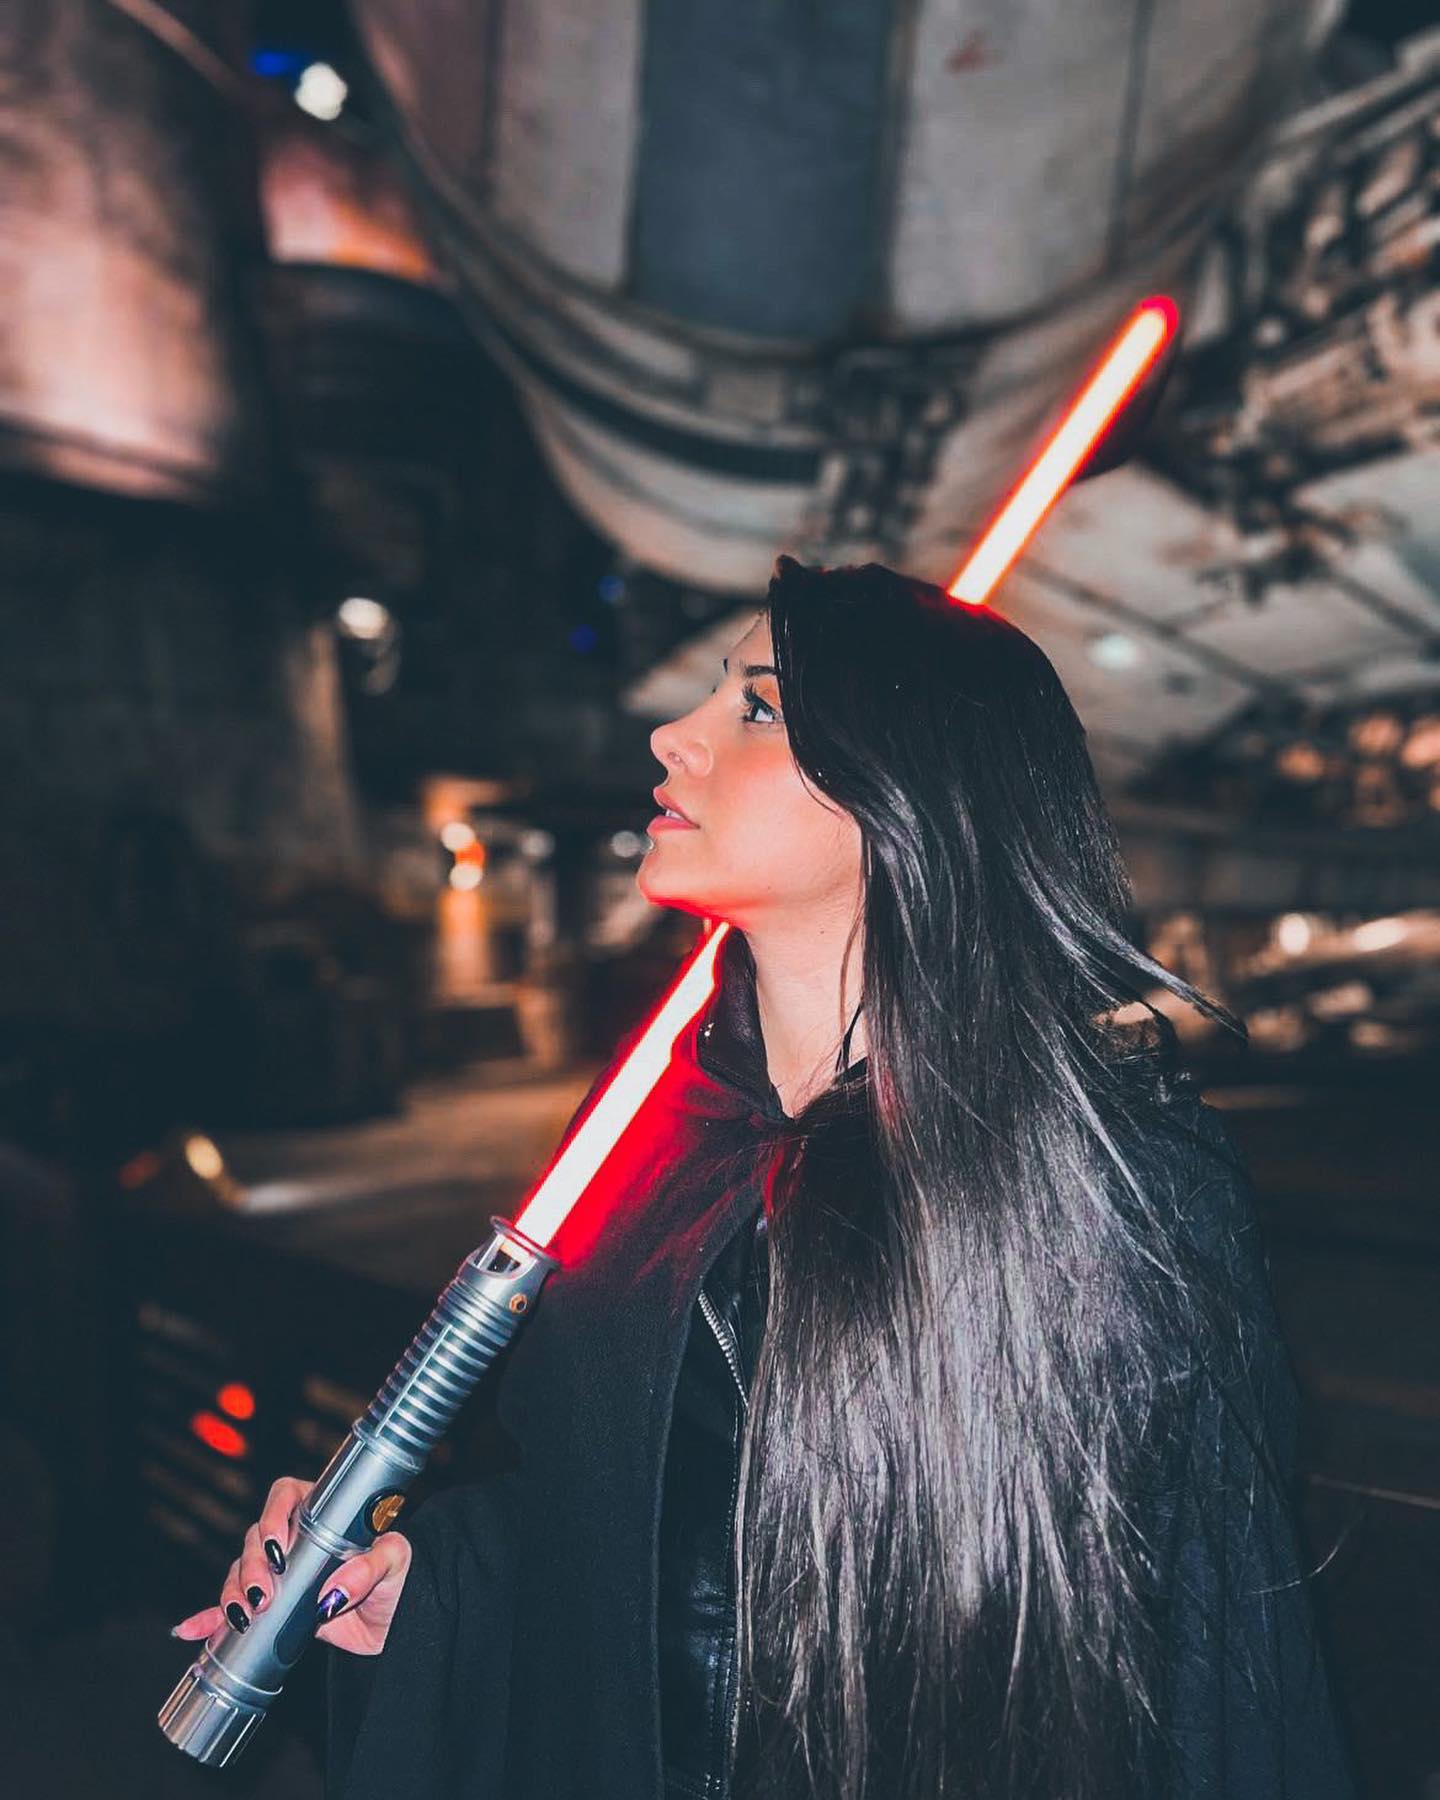 Cual es tu Dani Sith favorita? 1,2,3,4,5,6 o 7? 

"Let the past die. Kill it if you have to. It's the only way to become what you were meant to be." 

#disneyland #disneylandcalifornia #sith #girl